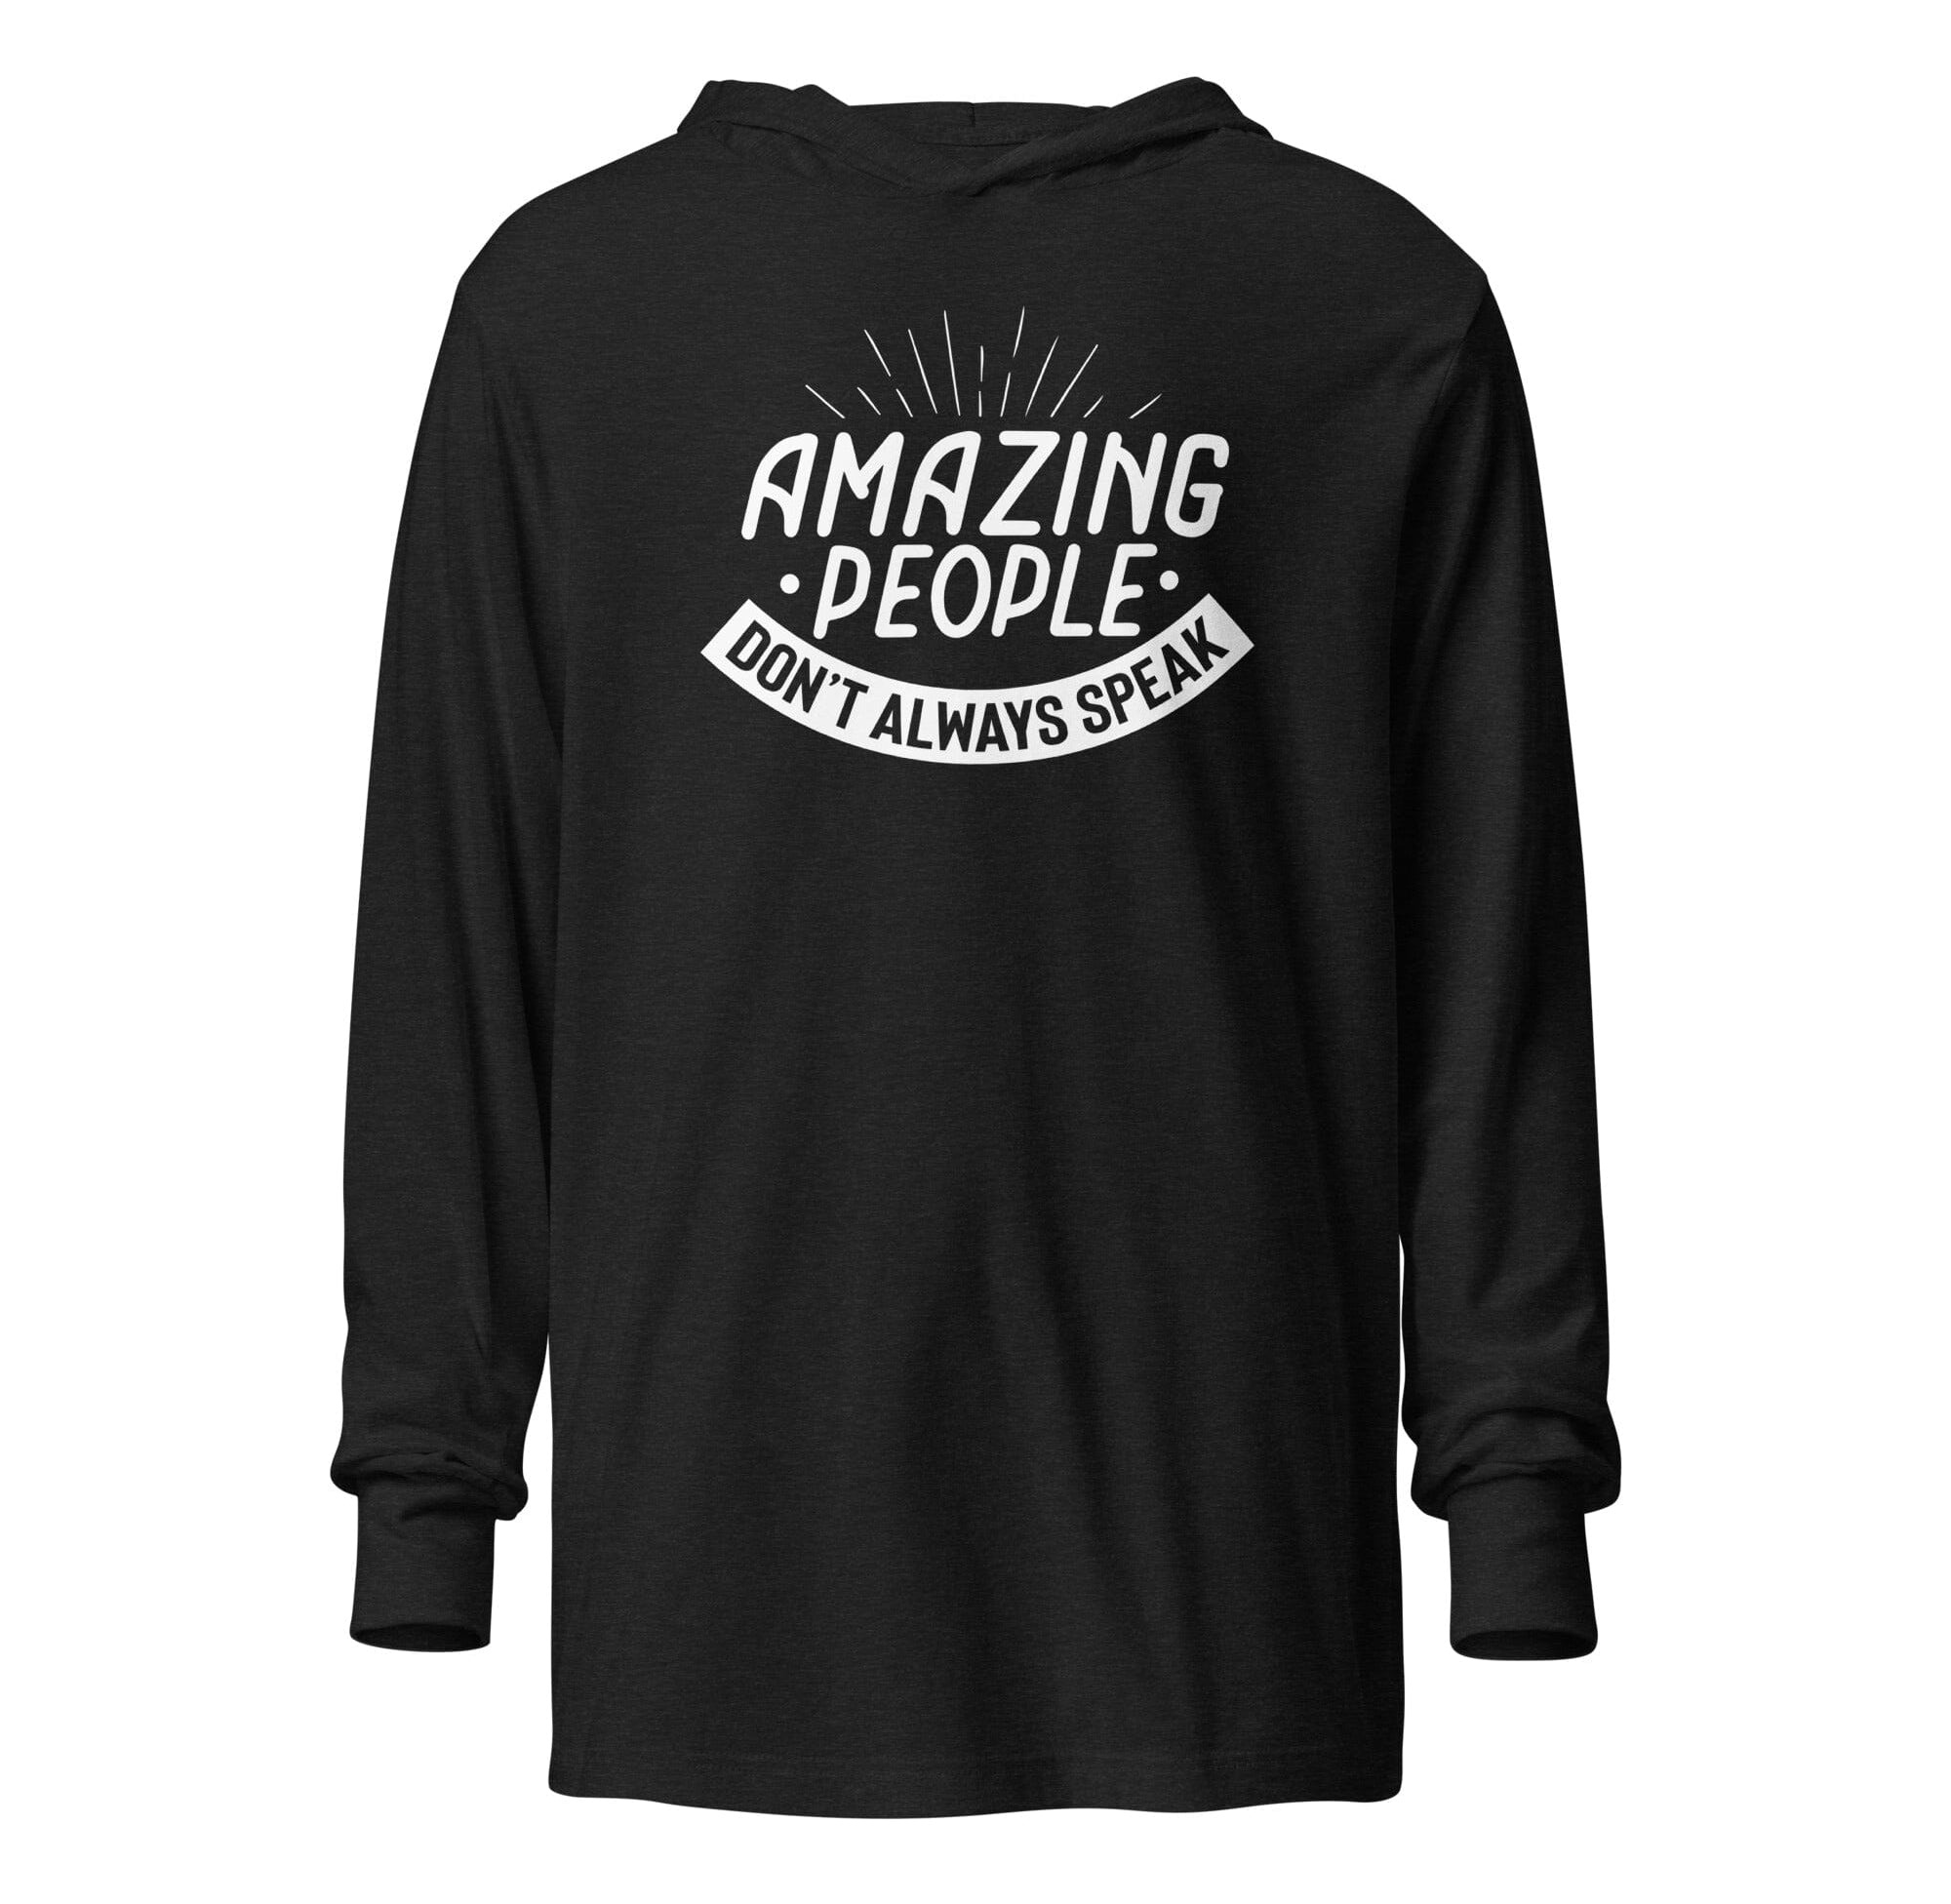 Amazing People Don't Always Speak Unisex Hooded long-sleeve tee The Autistic Innovator Charcoal-Black Triblend XS 